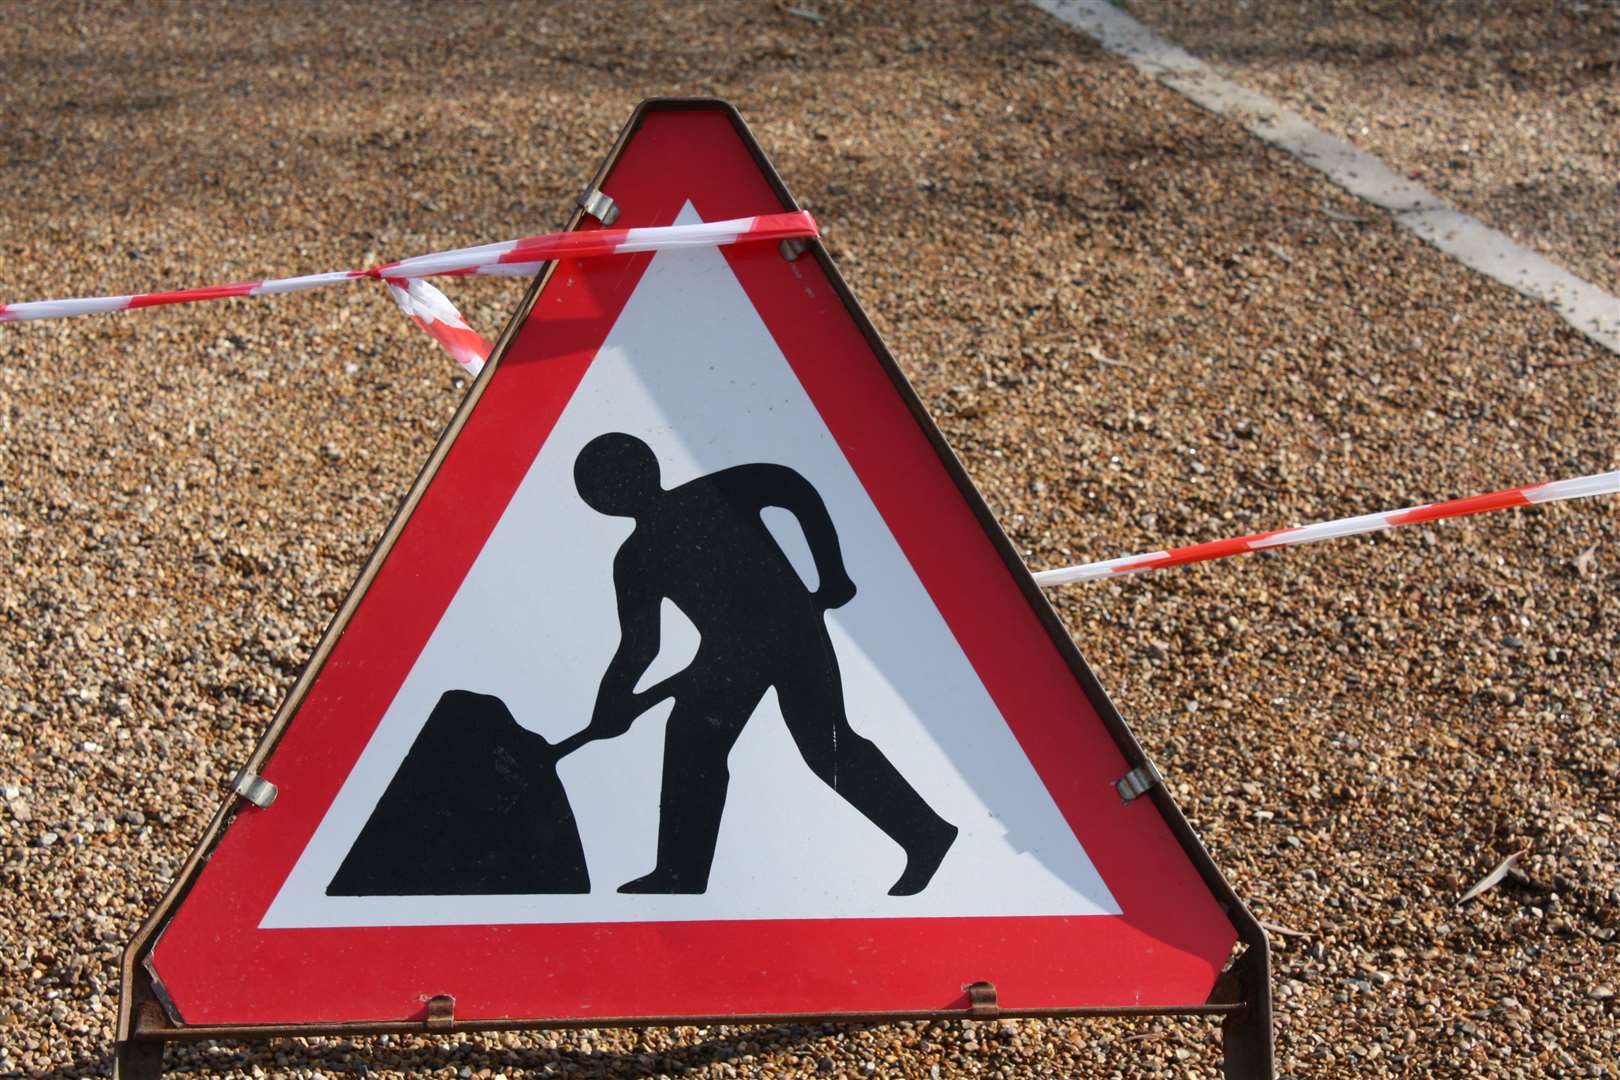 Roadworks will take place on the A9 to the north of Golspie from Sunday evening.